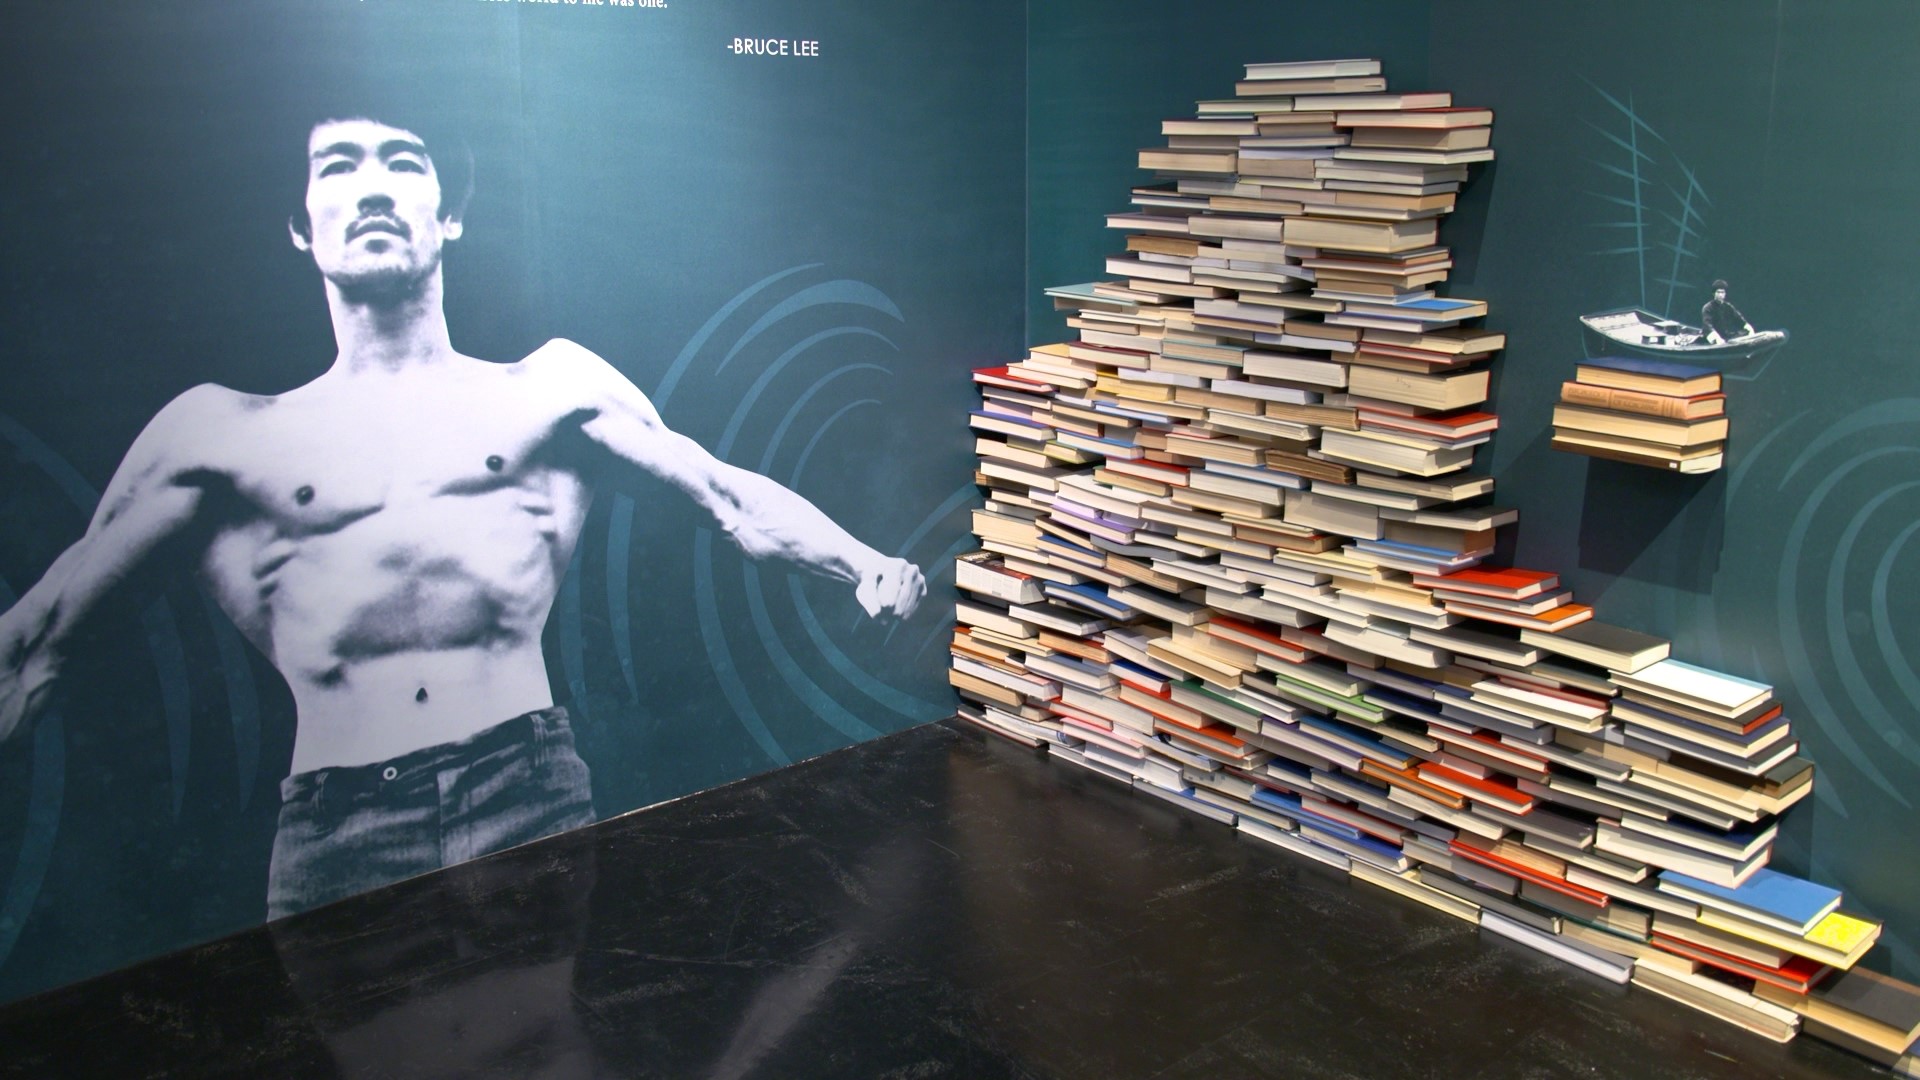 The exhibit, "Be Water, My Friend: The Teachings of Bruce Lee," debuted on July 9 and provides an immersive look into the iconic martial artist. #k5evening